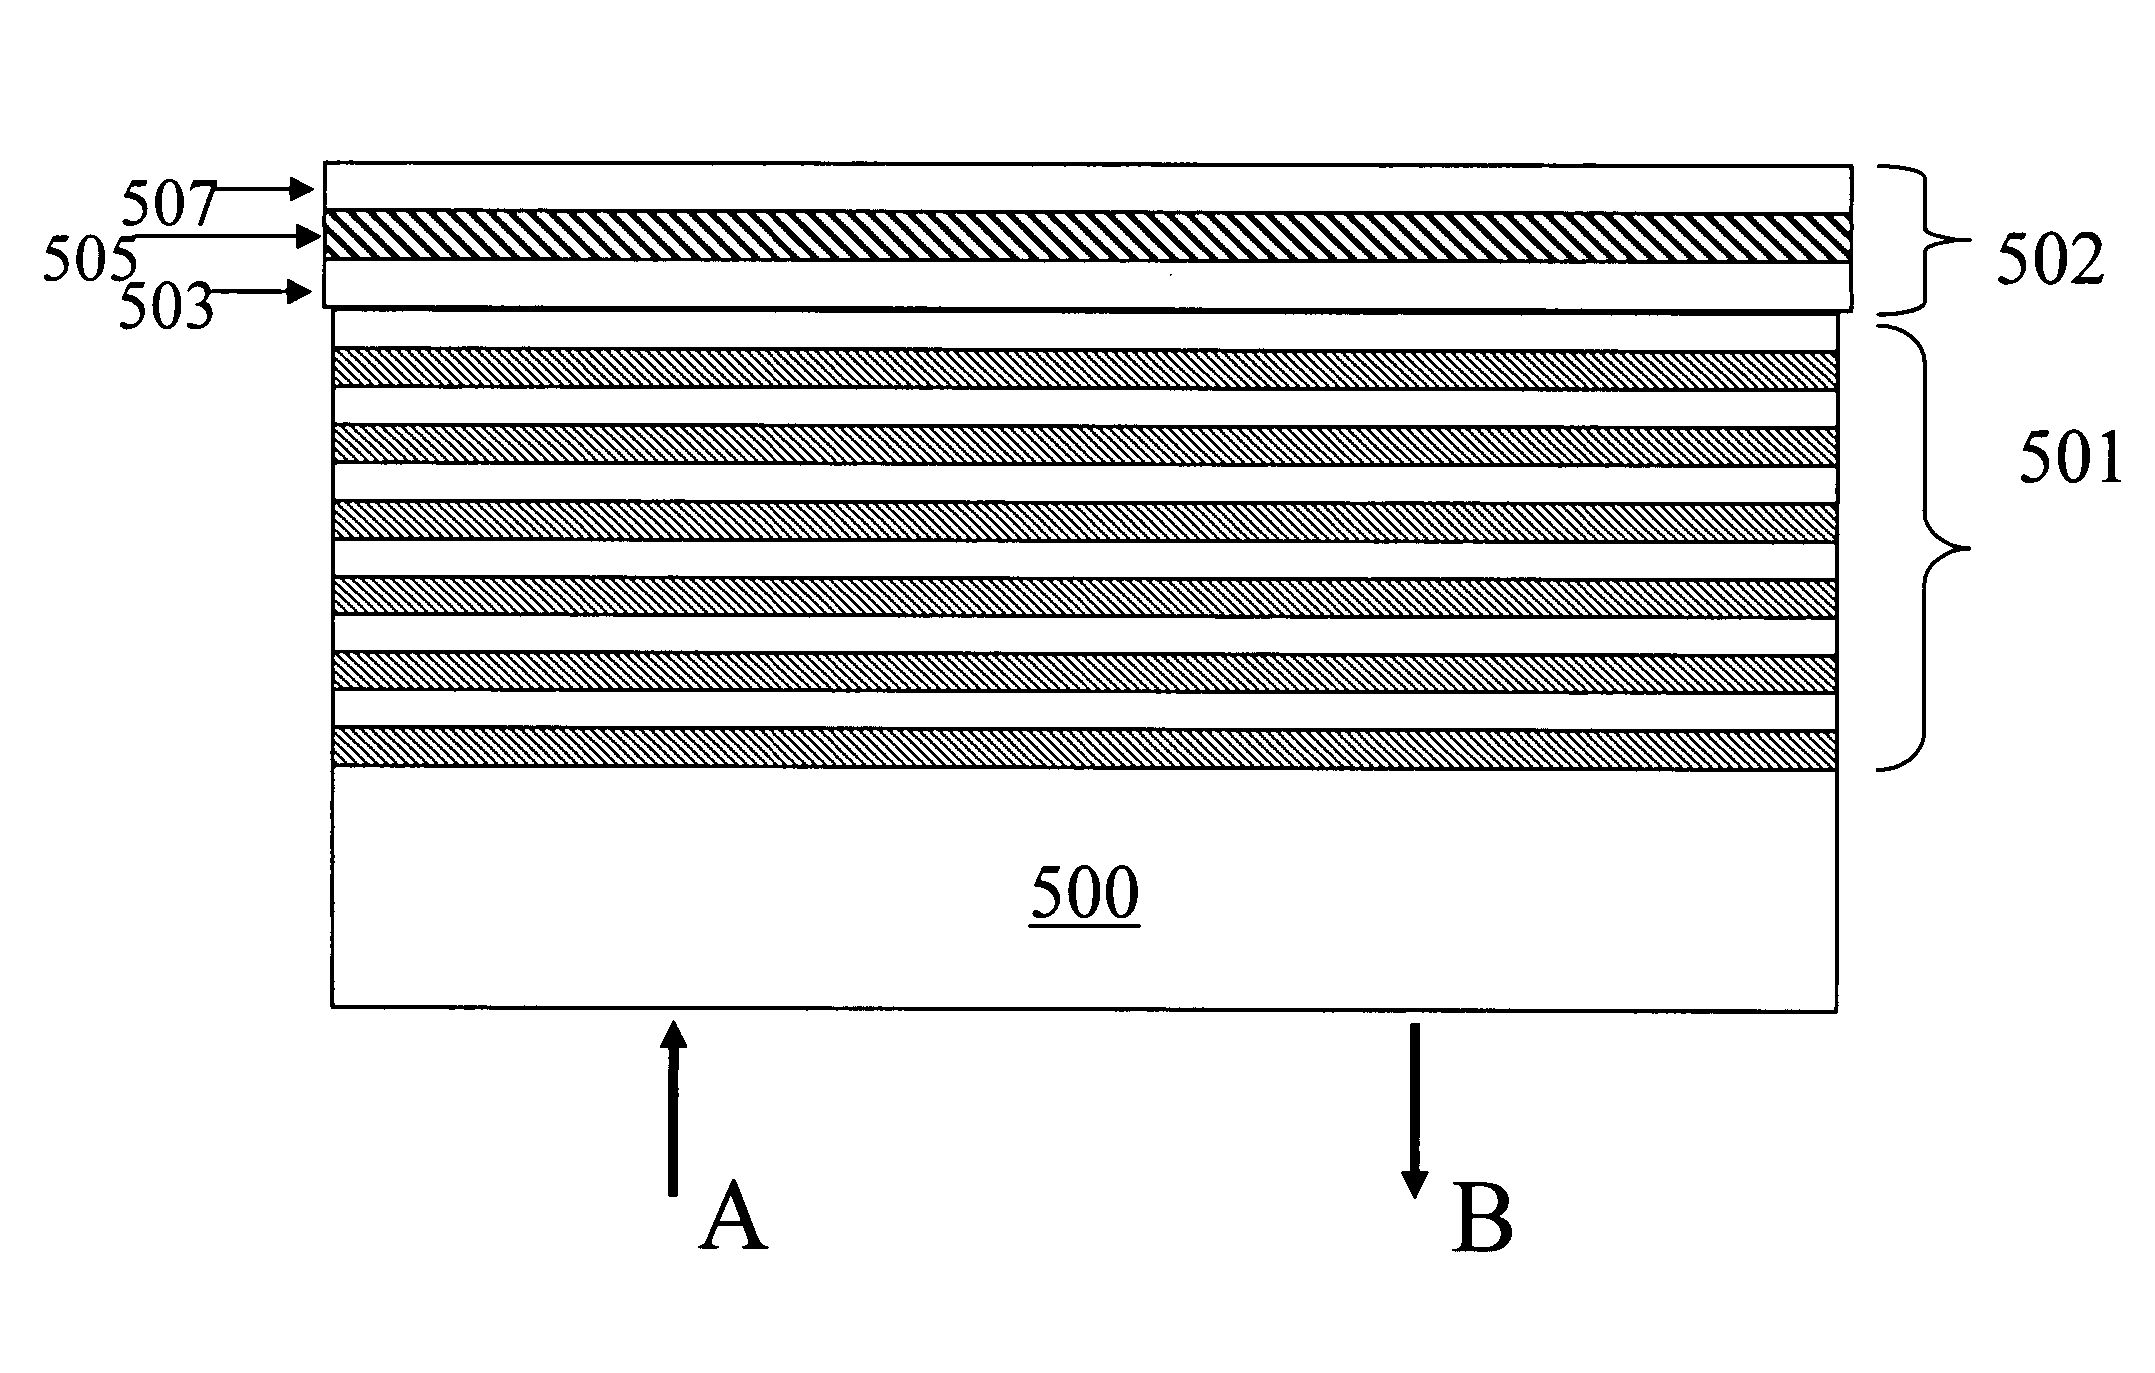 Aperiodic dielectric multilayer stack